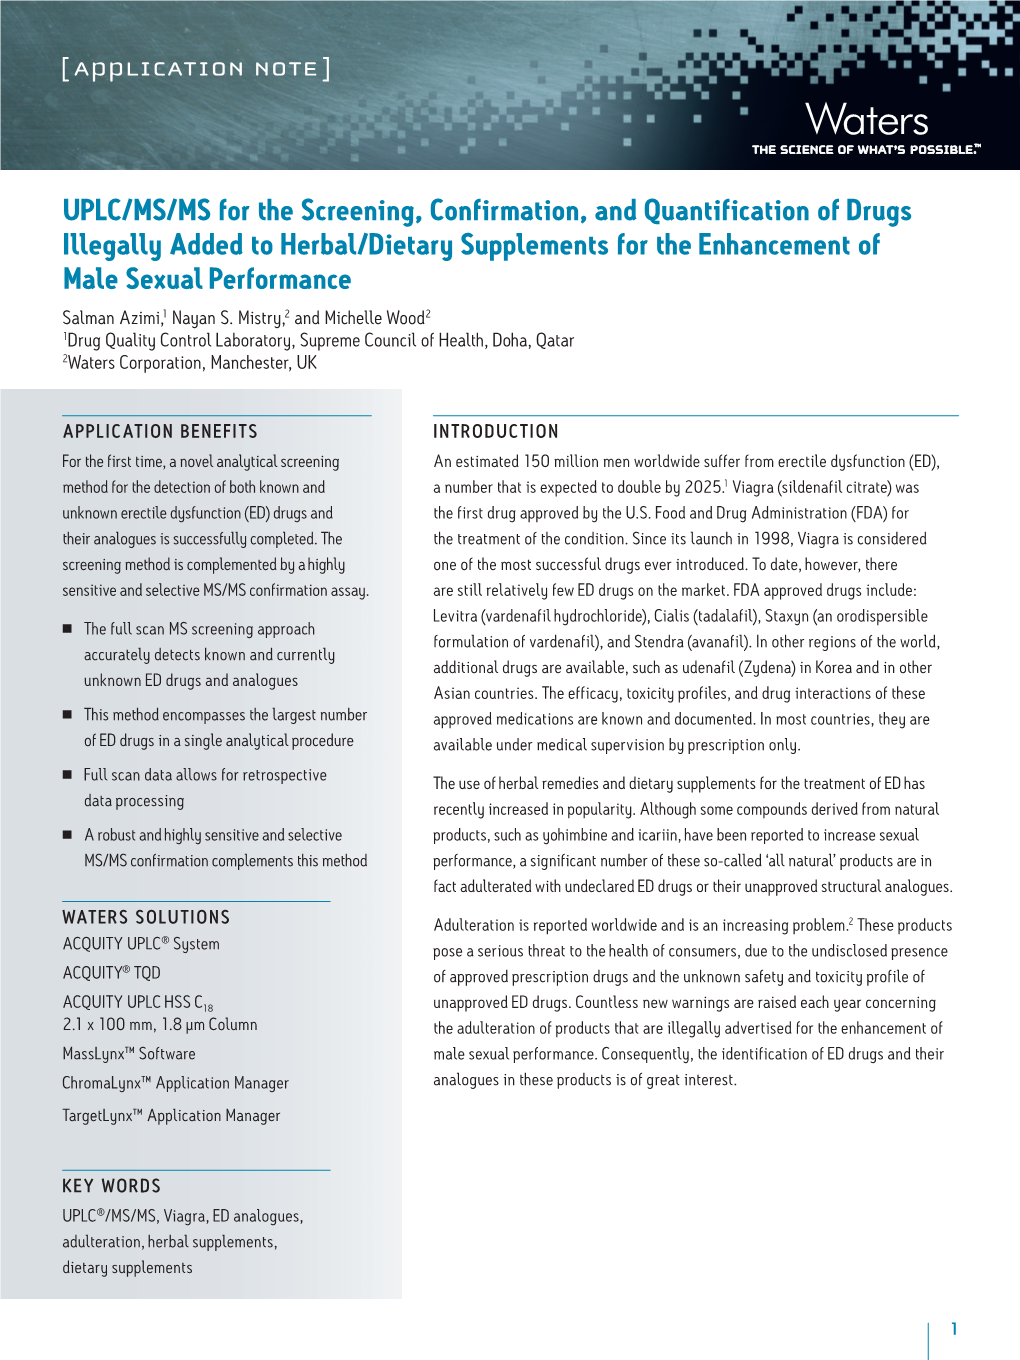 UPLC/MS/MS for the Screening, Confirmation, and Quantification Of